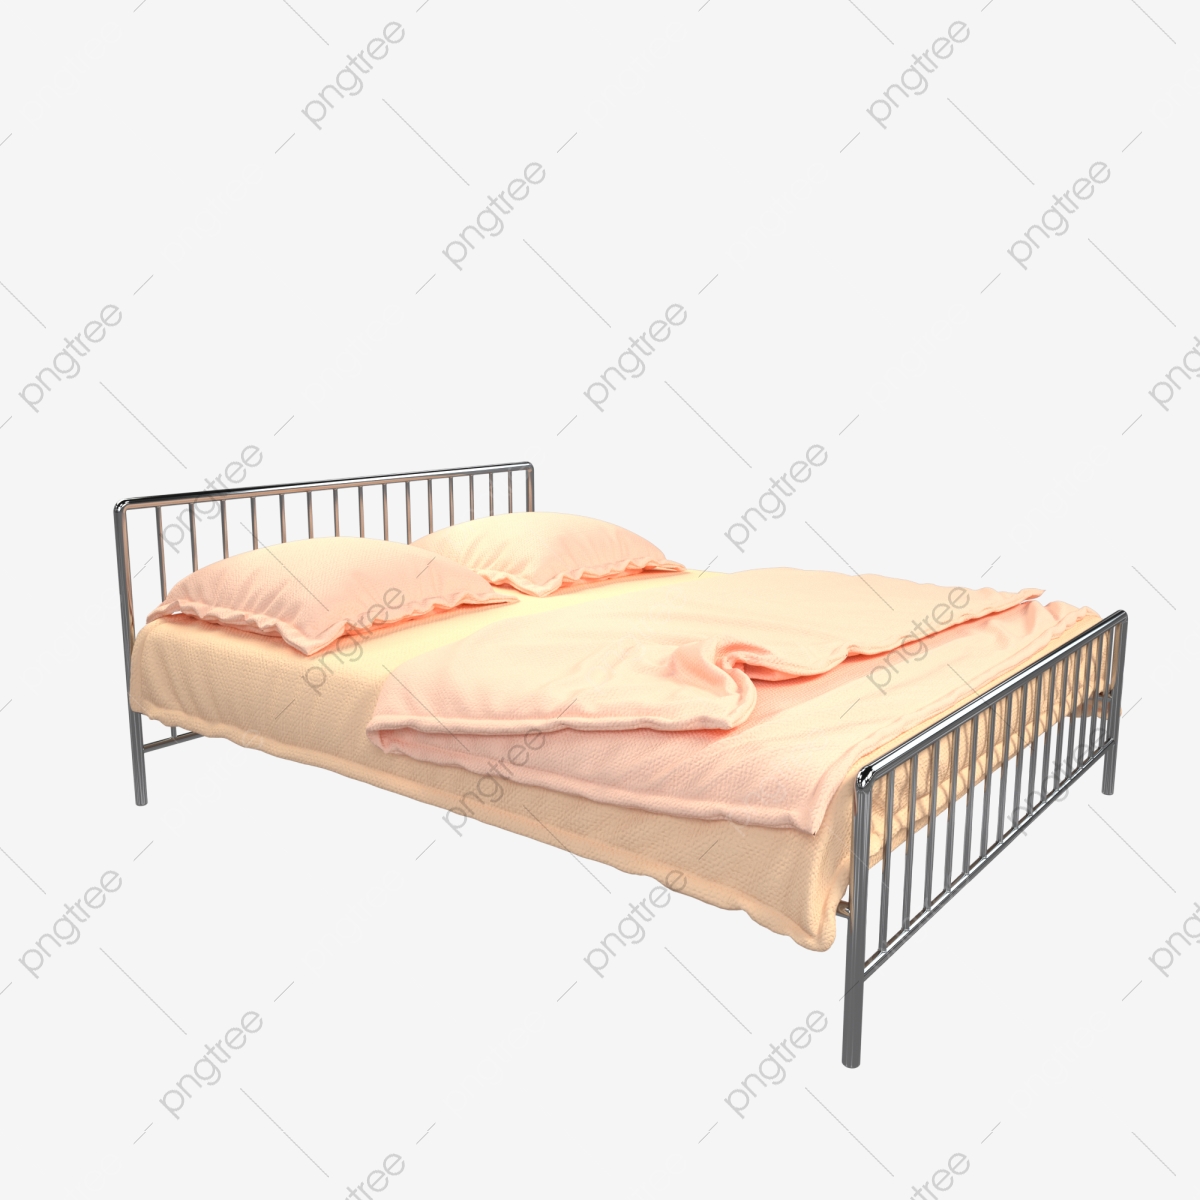 clipart bed double bed